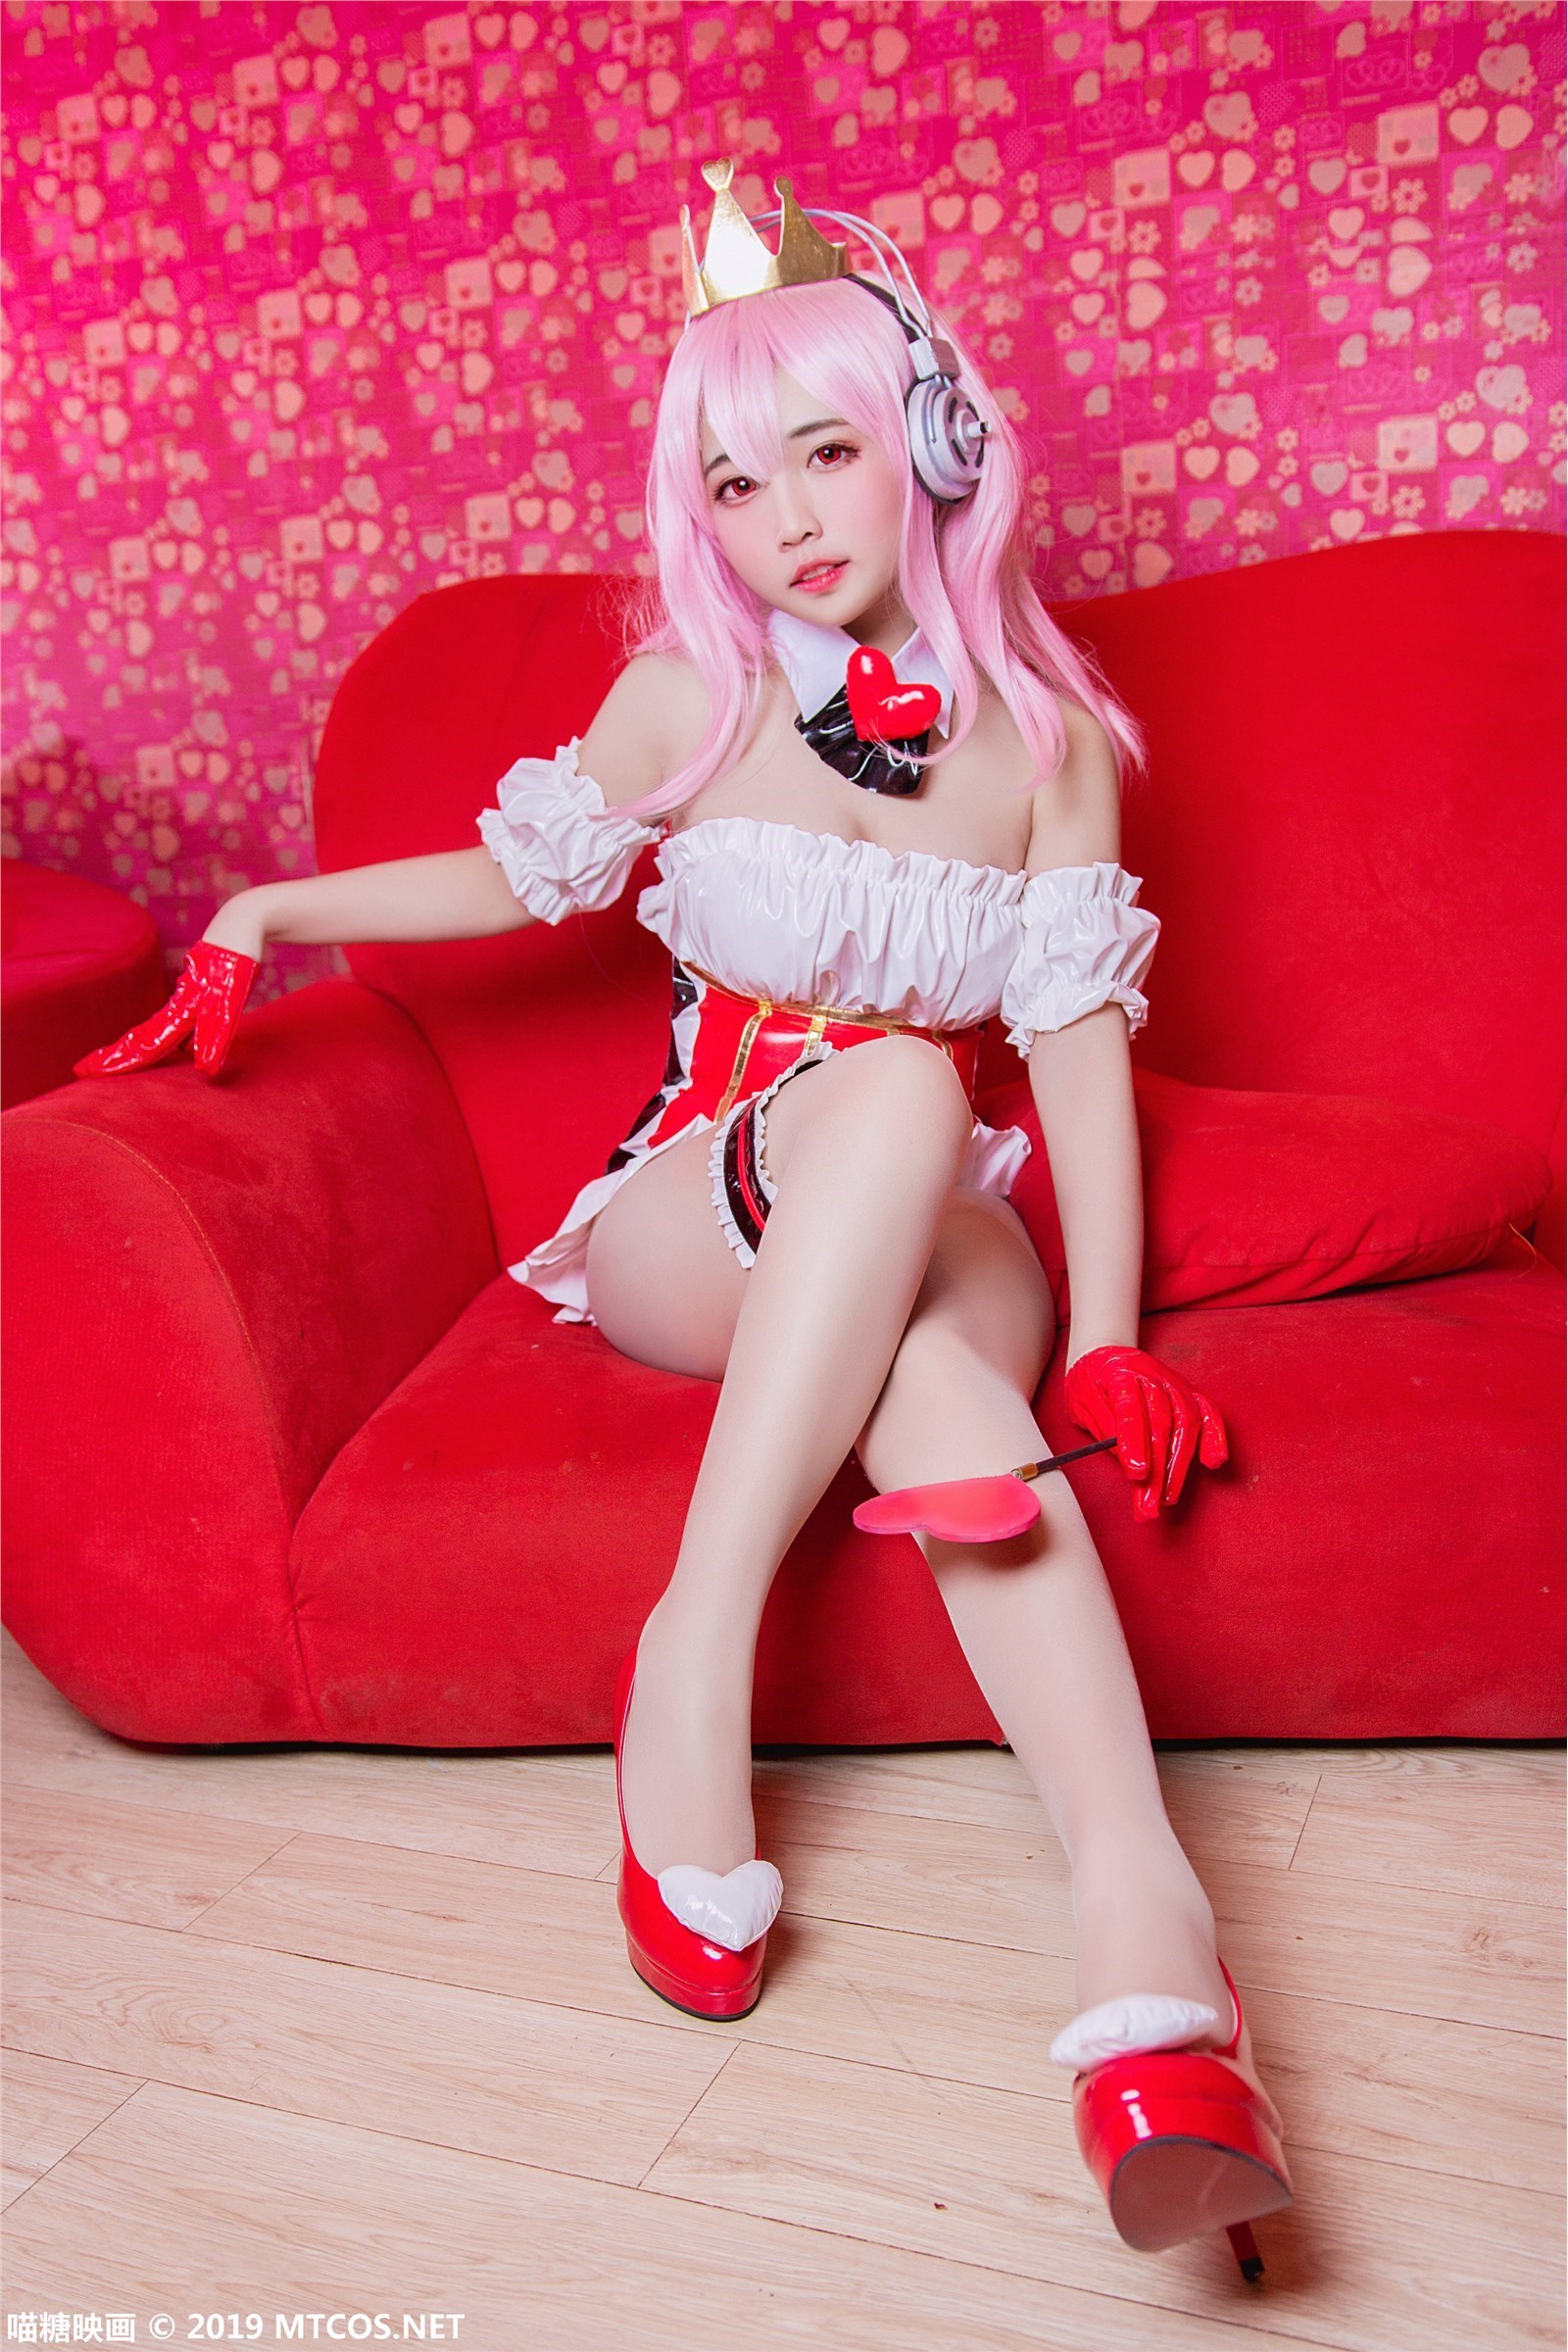 Meow sugar reflects the passion of Sony in Vol.050(32)